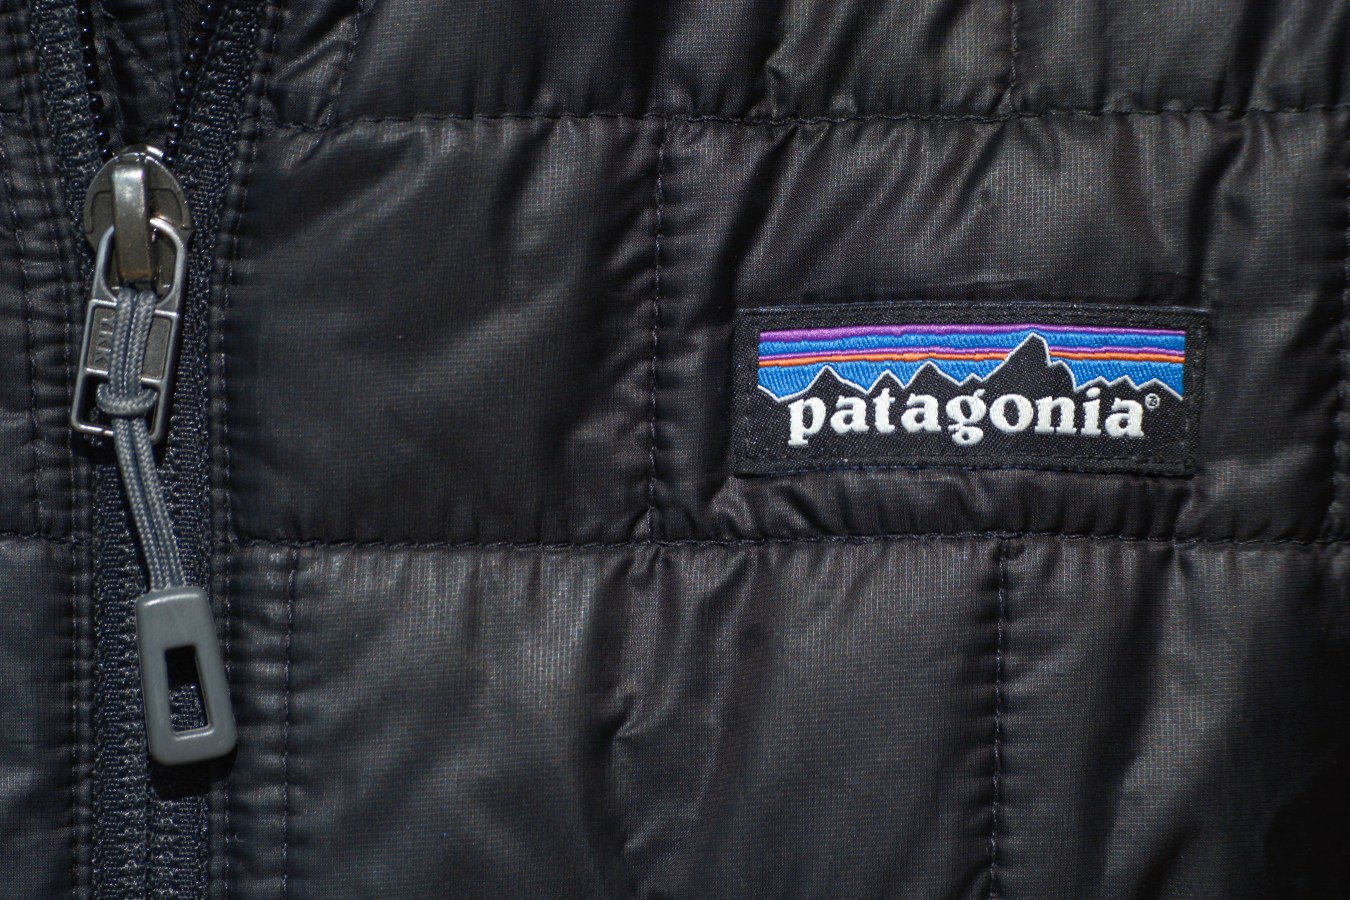 A woman wears a Patagonia jacket.